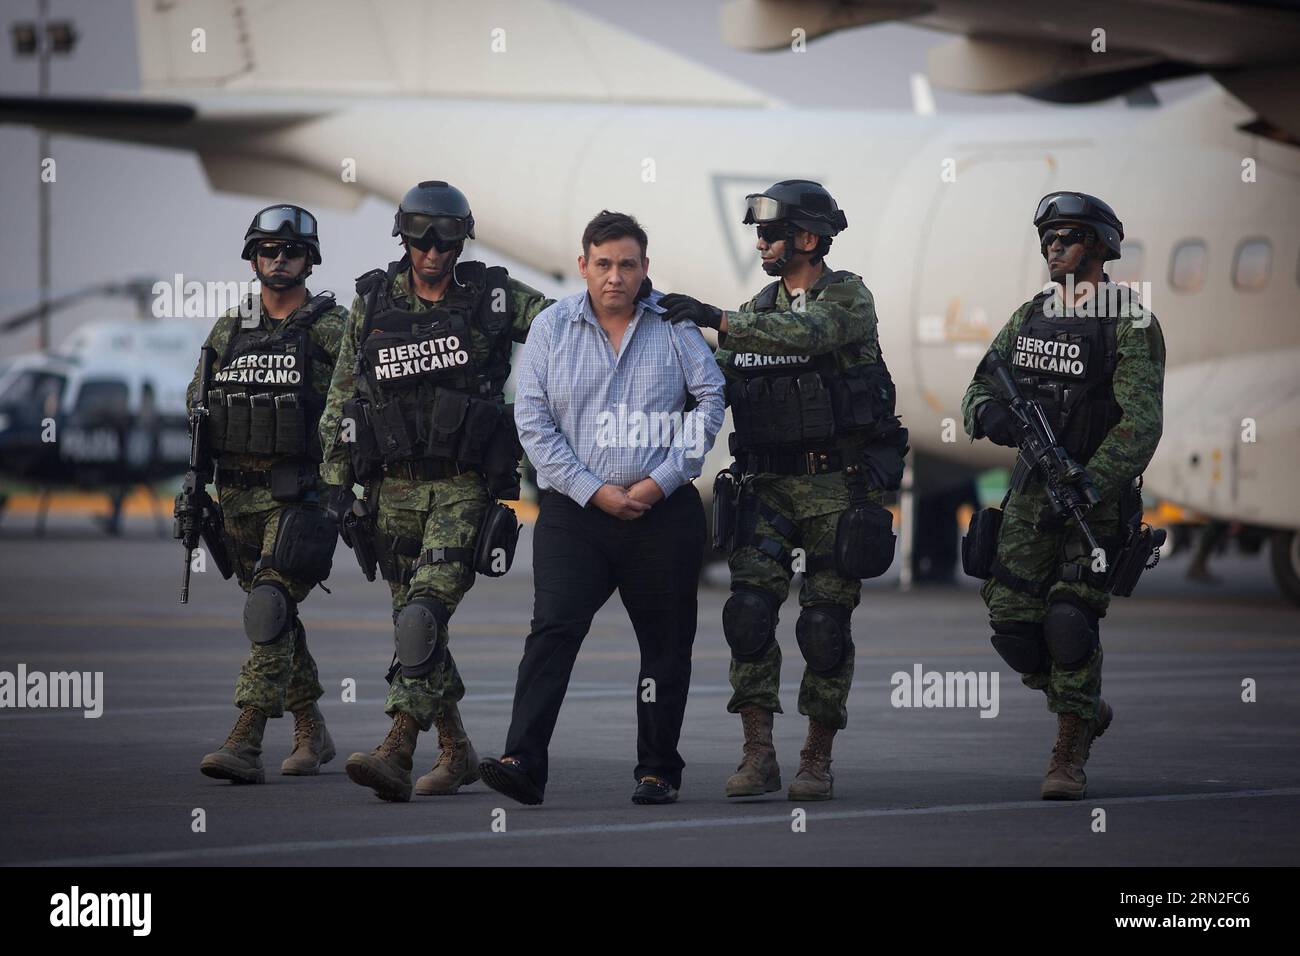 (150305) -- MEXICO CITY, March 4, 2015 -- Mexican Army personnel escort Omar Trevino Morales (C) in Mexico City, capital of Mexico, on March 4, 2015. Mexican authorities on Wednesday arrested the head of the country s northern Los Zetas drug cartel, Omar Trevino Morales. ) (jp) MEXICO-MEXICO CITY-TREVINO-ARREST PEDROxMERA PUBLICATIONxNOTxINxCHN   Mexico City March 4 2015 MEXICAN Army Personnel Escort Omar Trevino Morales C in Mexico City Capital of Mexico ON March 4 2015 MEXICAN Authorities ON Wednesday Arrested The Head of The Country S Northern Los Zetas Drug Cartel Omar Trevino Morales JP M Stock Photo